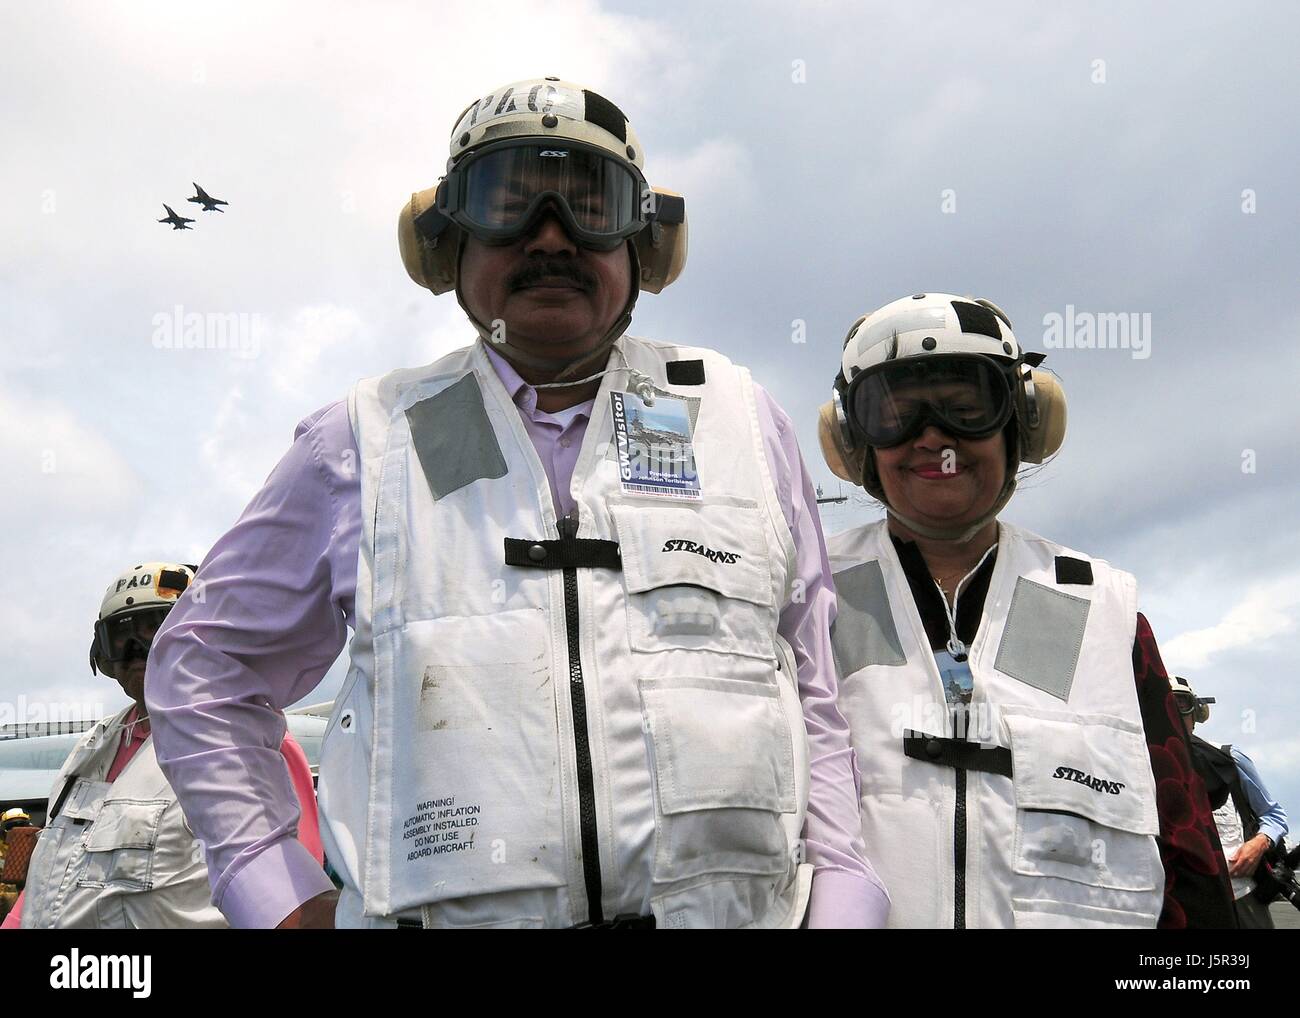 Palauan President Johnson Toribiong and wife Valeria Toribiong watch aircraft take off from the flight deck of the USN Nimitz-class aircraft carrier USS George Washington during a visit June 21, 2009 in the Pacific Ocean.    (photo by MCSS Rachel N. Clayton /US Navy  via Planetpix) Stock Photo